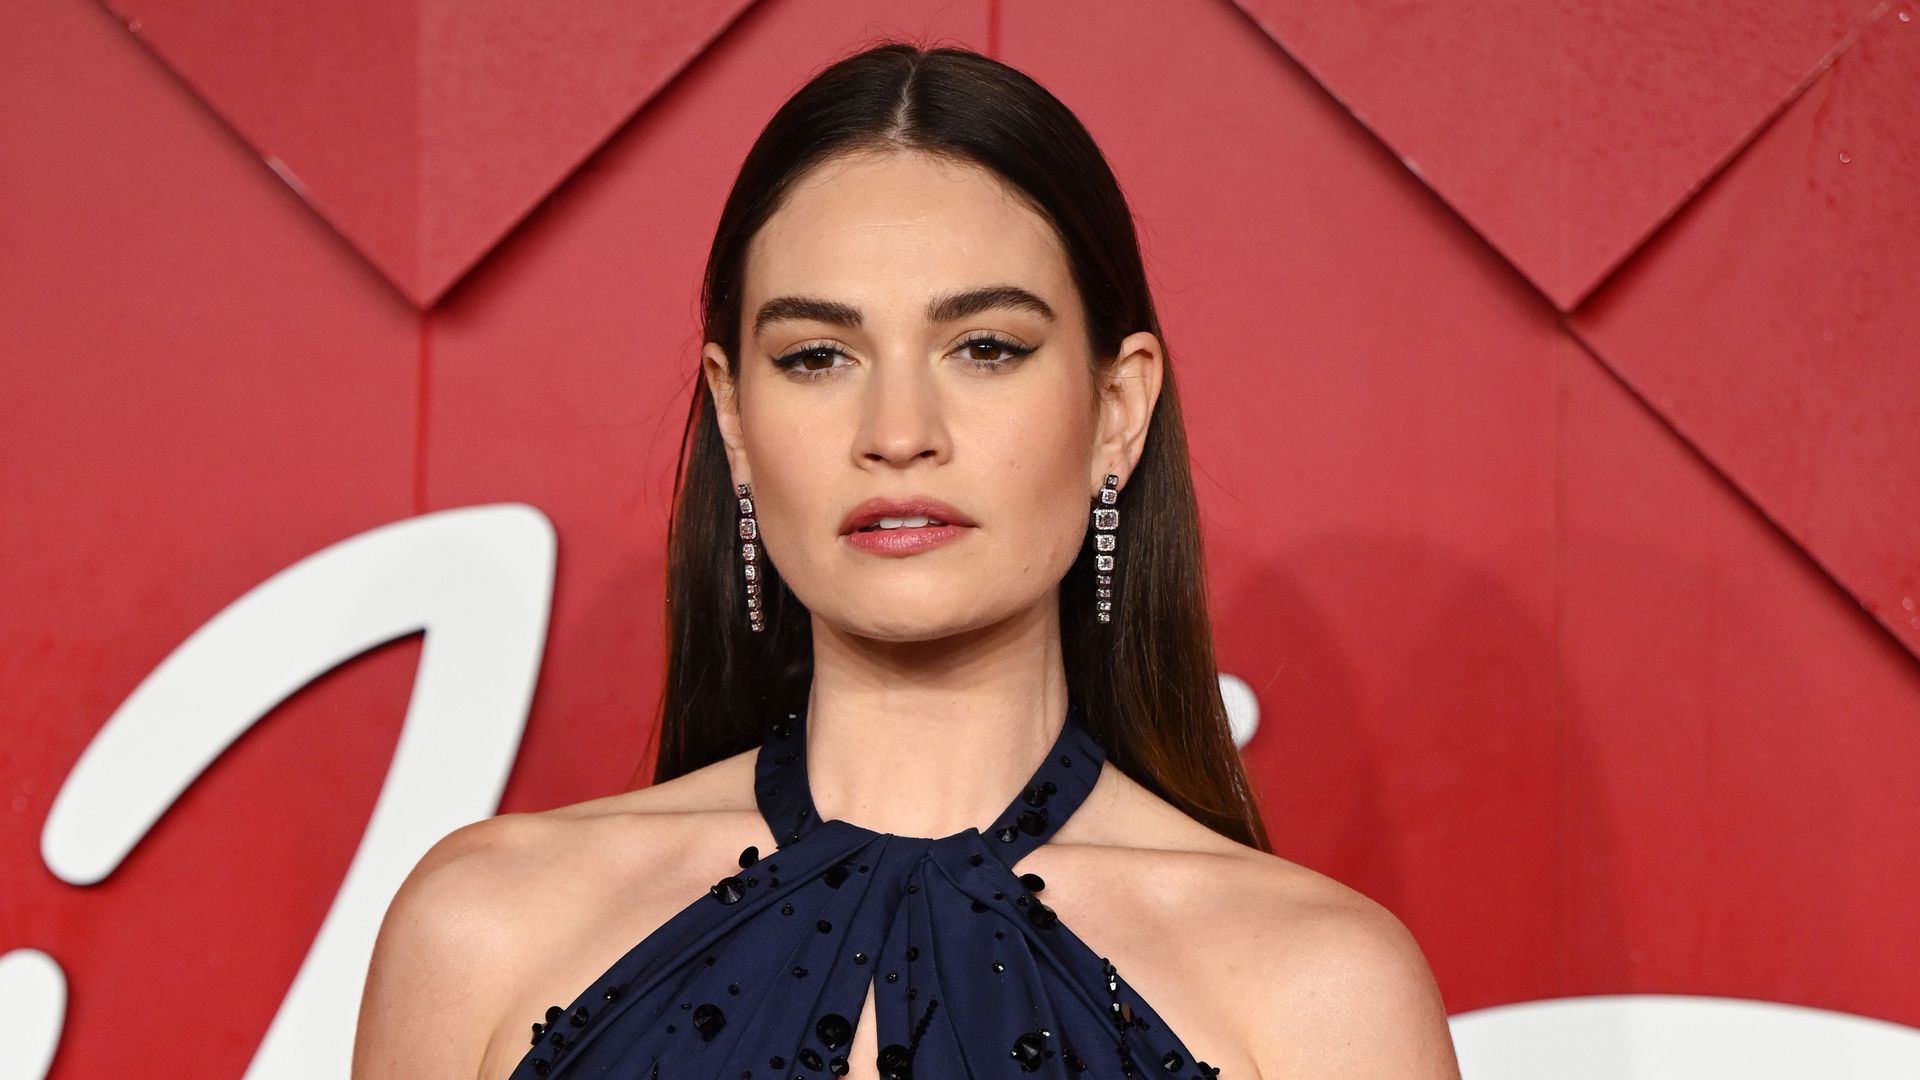 LONDON, ENGLAND - DECEMBER 04: Lily James attends The Fashion Awards 2023 Presented by Pandora at the Royal Albert Hall on December 04, 2023 in London, England. (Photo by Karwai Tang/WireImage)